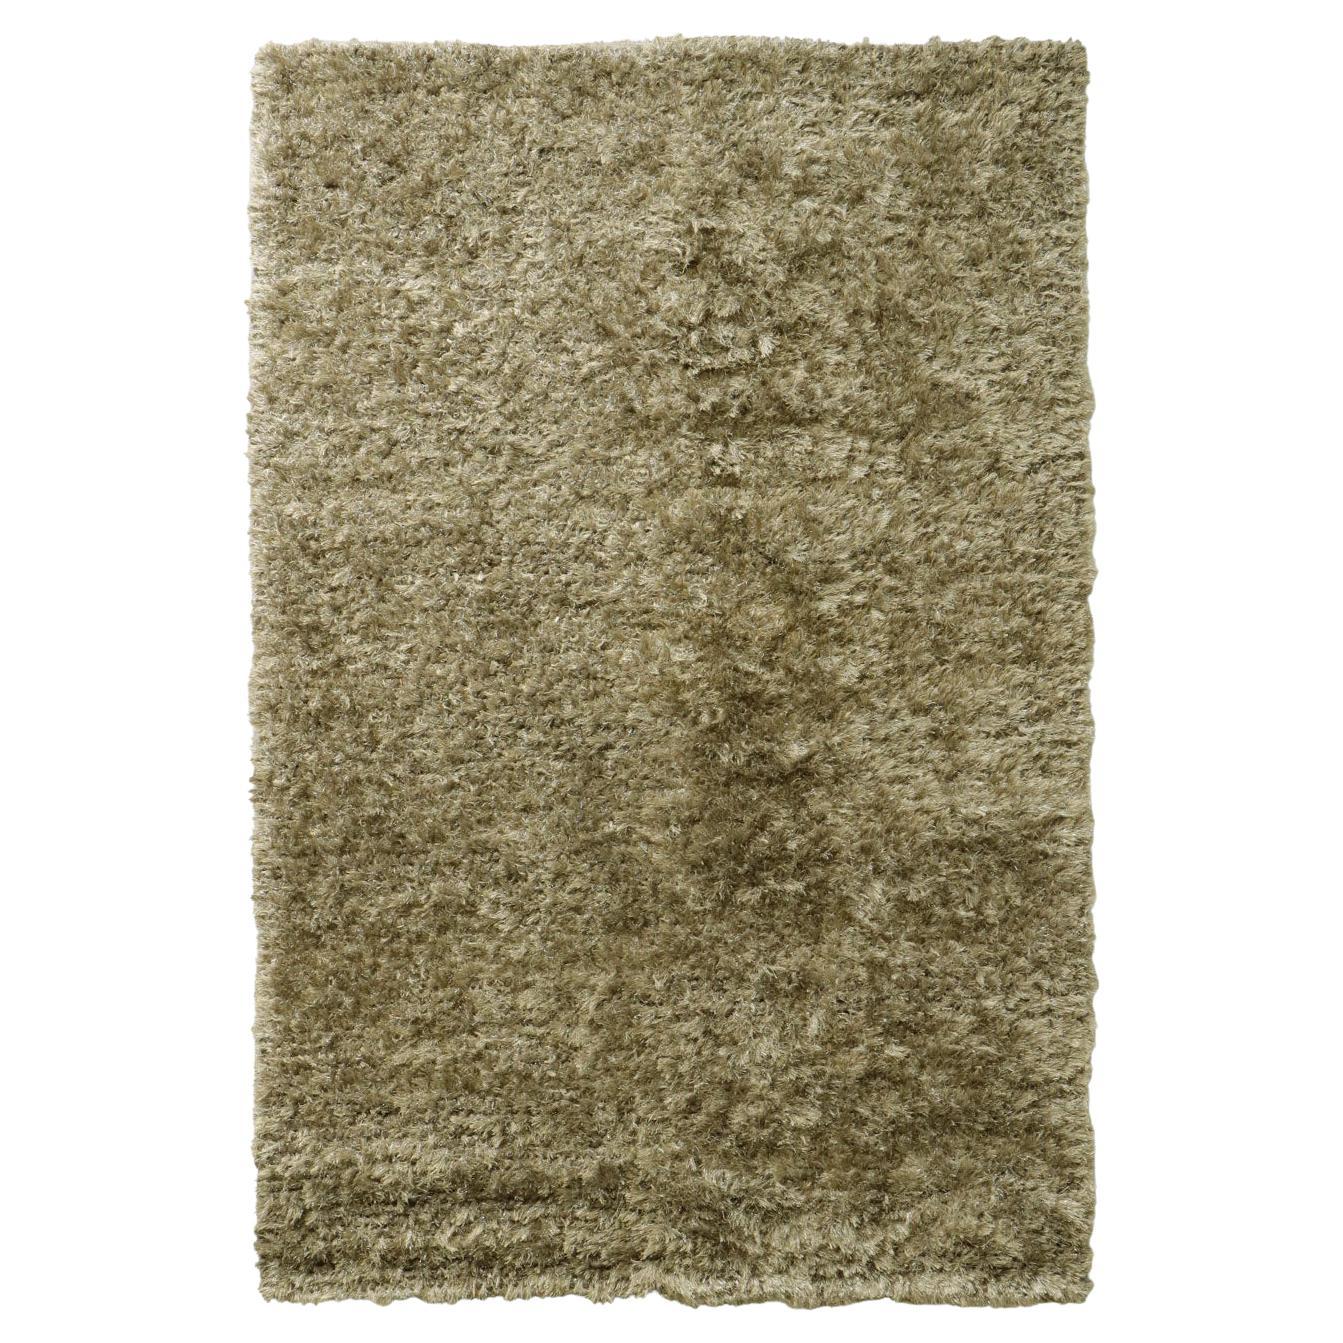 Natural Inspired Luminous Spring Rug by Deanna Comellini In Stock 170x240 cm For Sale